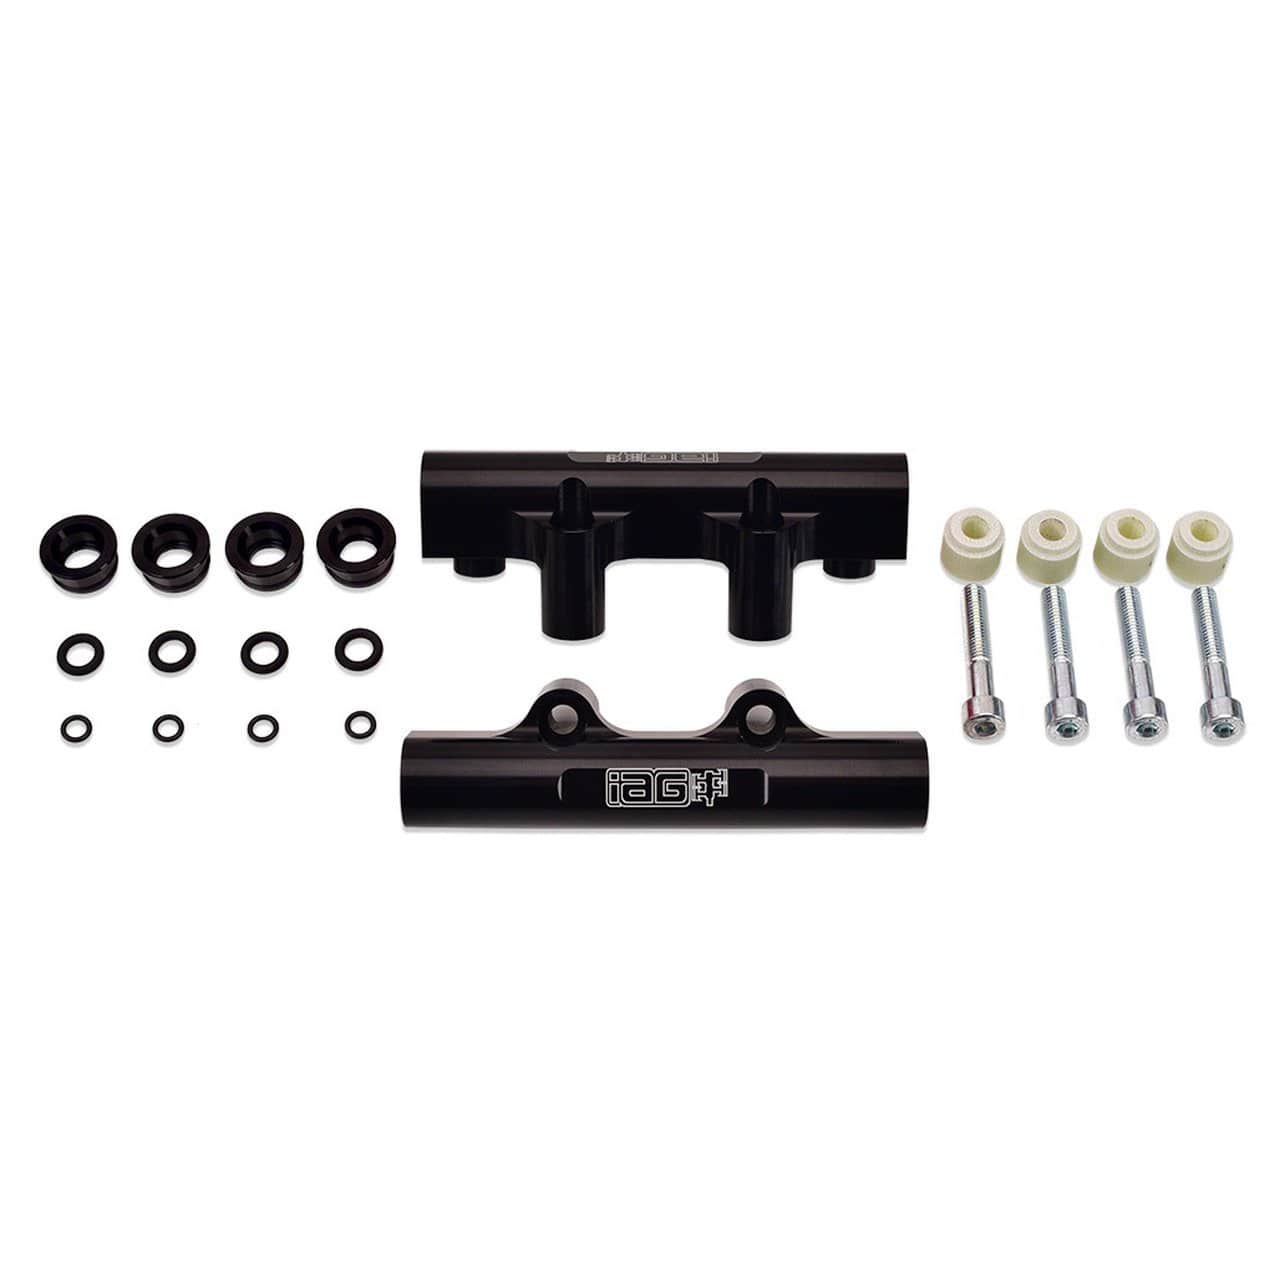 IAG Performance Side Feed to Top Feed Fuel Rail Conversion Kit for 2004-06 Subaru STI, 05-07 LGT, 04-05 FXT (Black Finish) - Dirty Racing Products